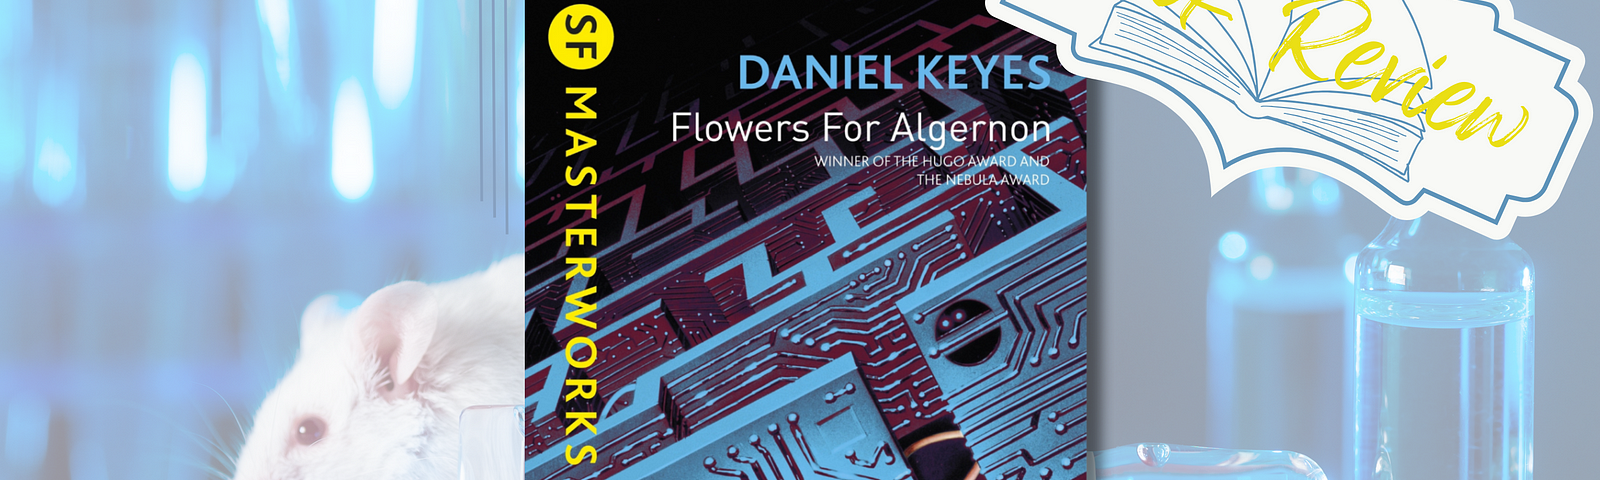 A white lab rat in the background and in the cover of Daniel Keyes’ book: Flowers for Algernon.